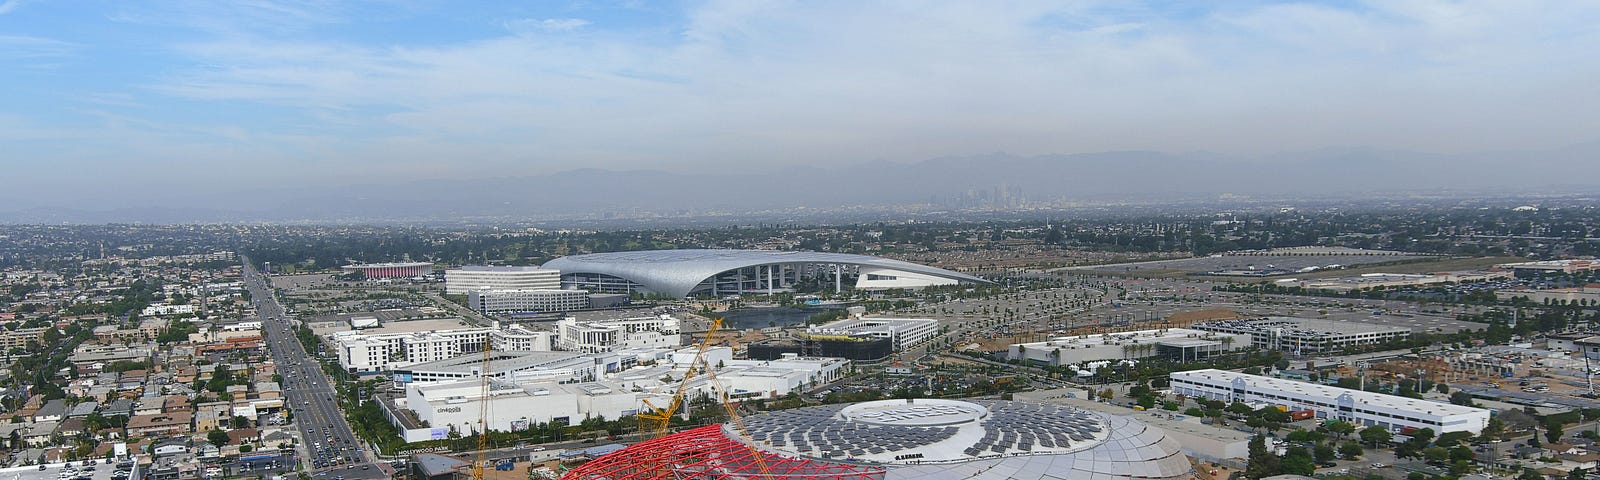 Aerial view of the Intuit Dome construction site with SoFi Stadium in the background in Inglewood, California, October 13, 2023. Photo by Image of Sport/Reuters